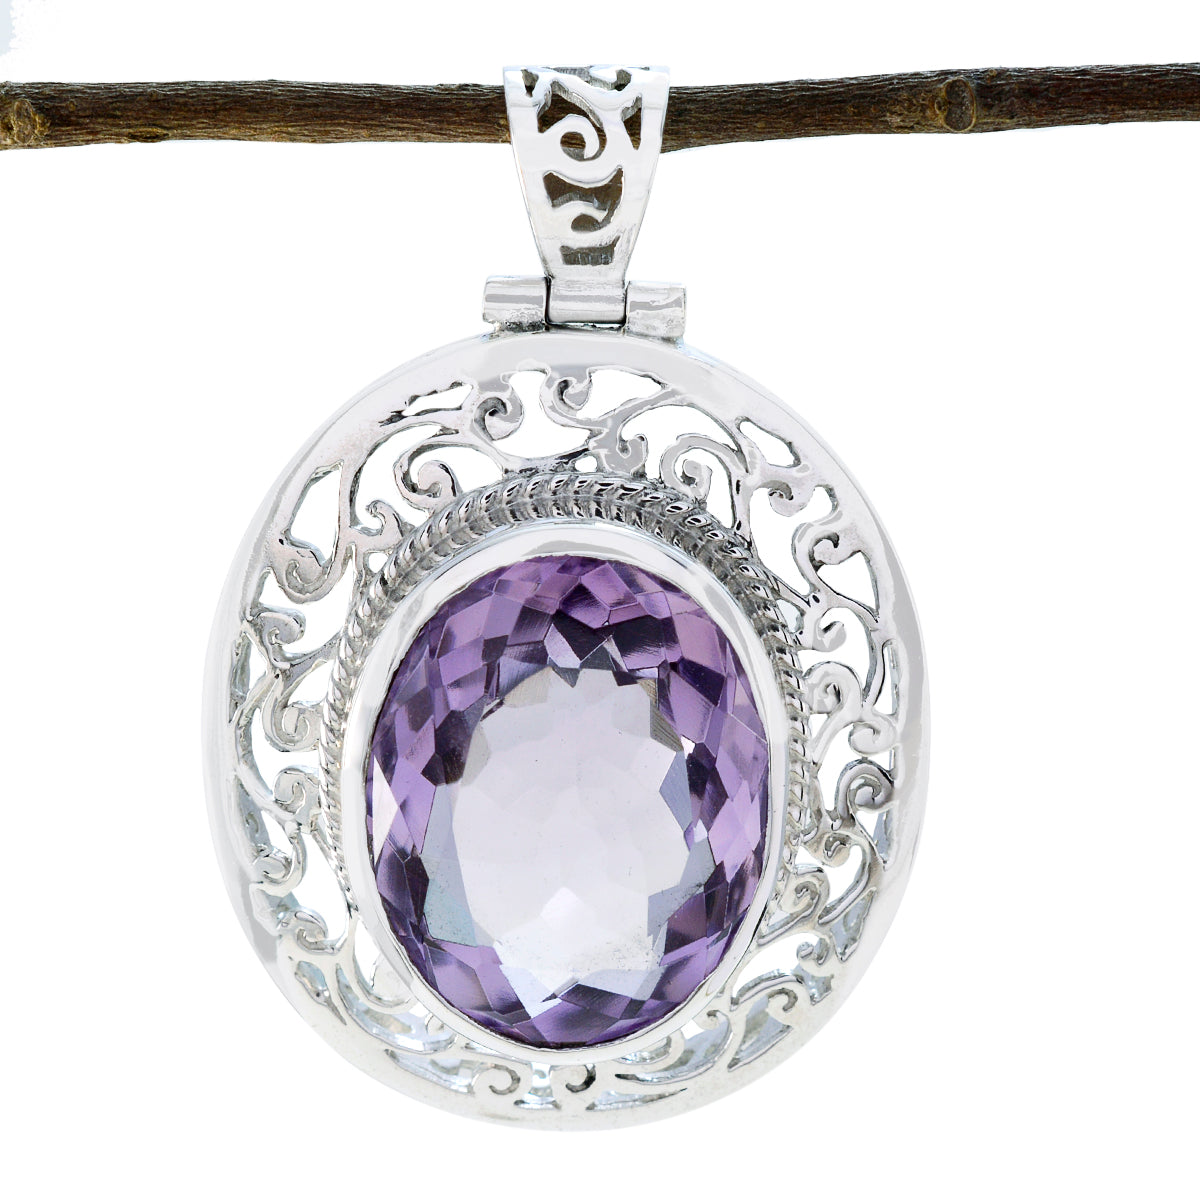 Riyo Real Gemstones Oval Faceted Purple Amethyst 925 Sterling Silver Pendant gift fordaughter day